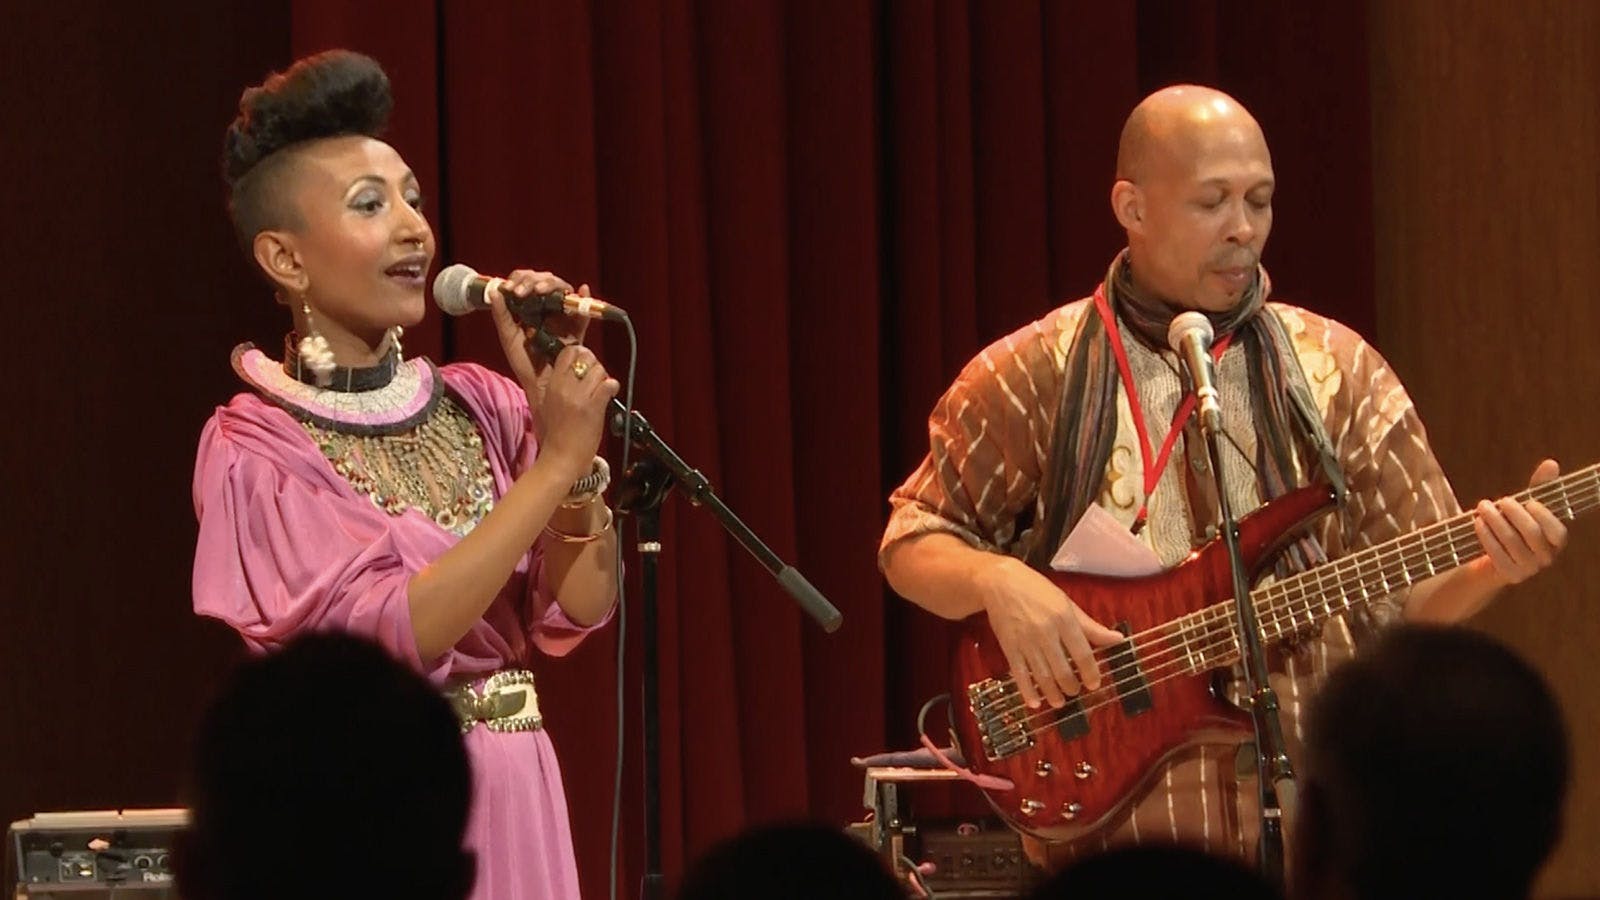 Two members of Alsarah & the Nubatones in performance. The figure on the left is singing, while the figure on the right plays guitar.